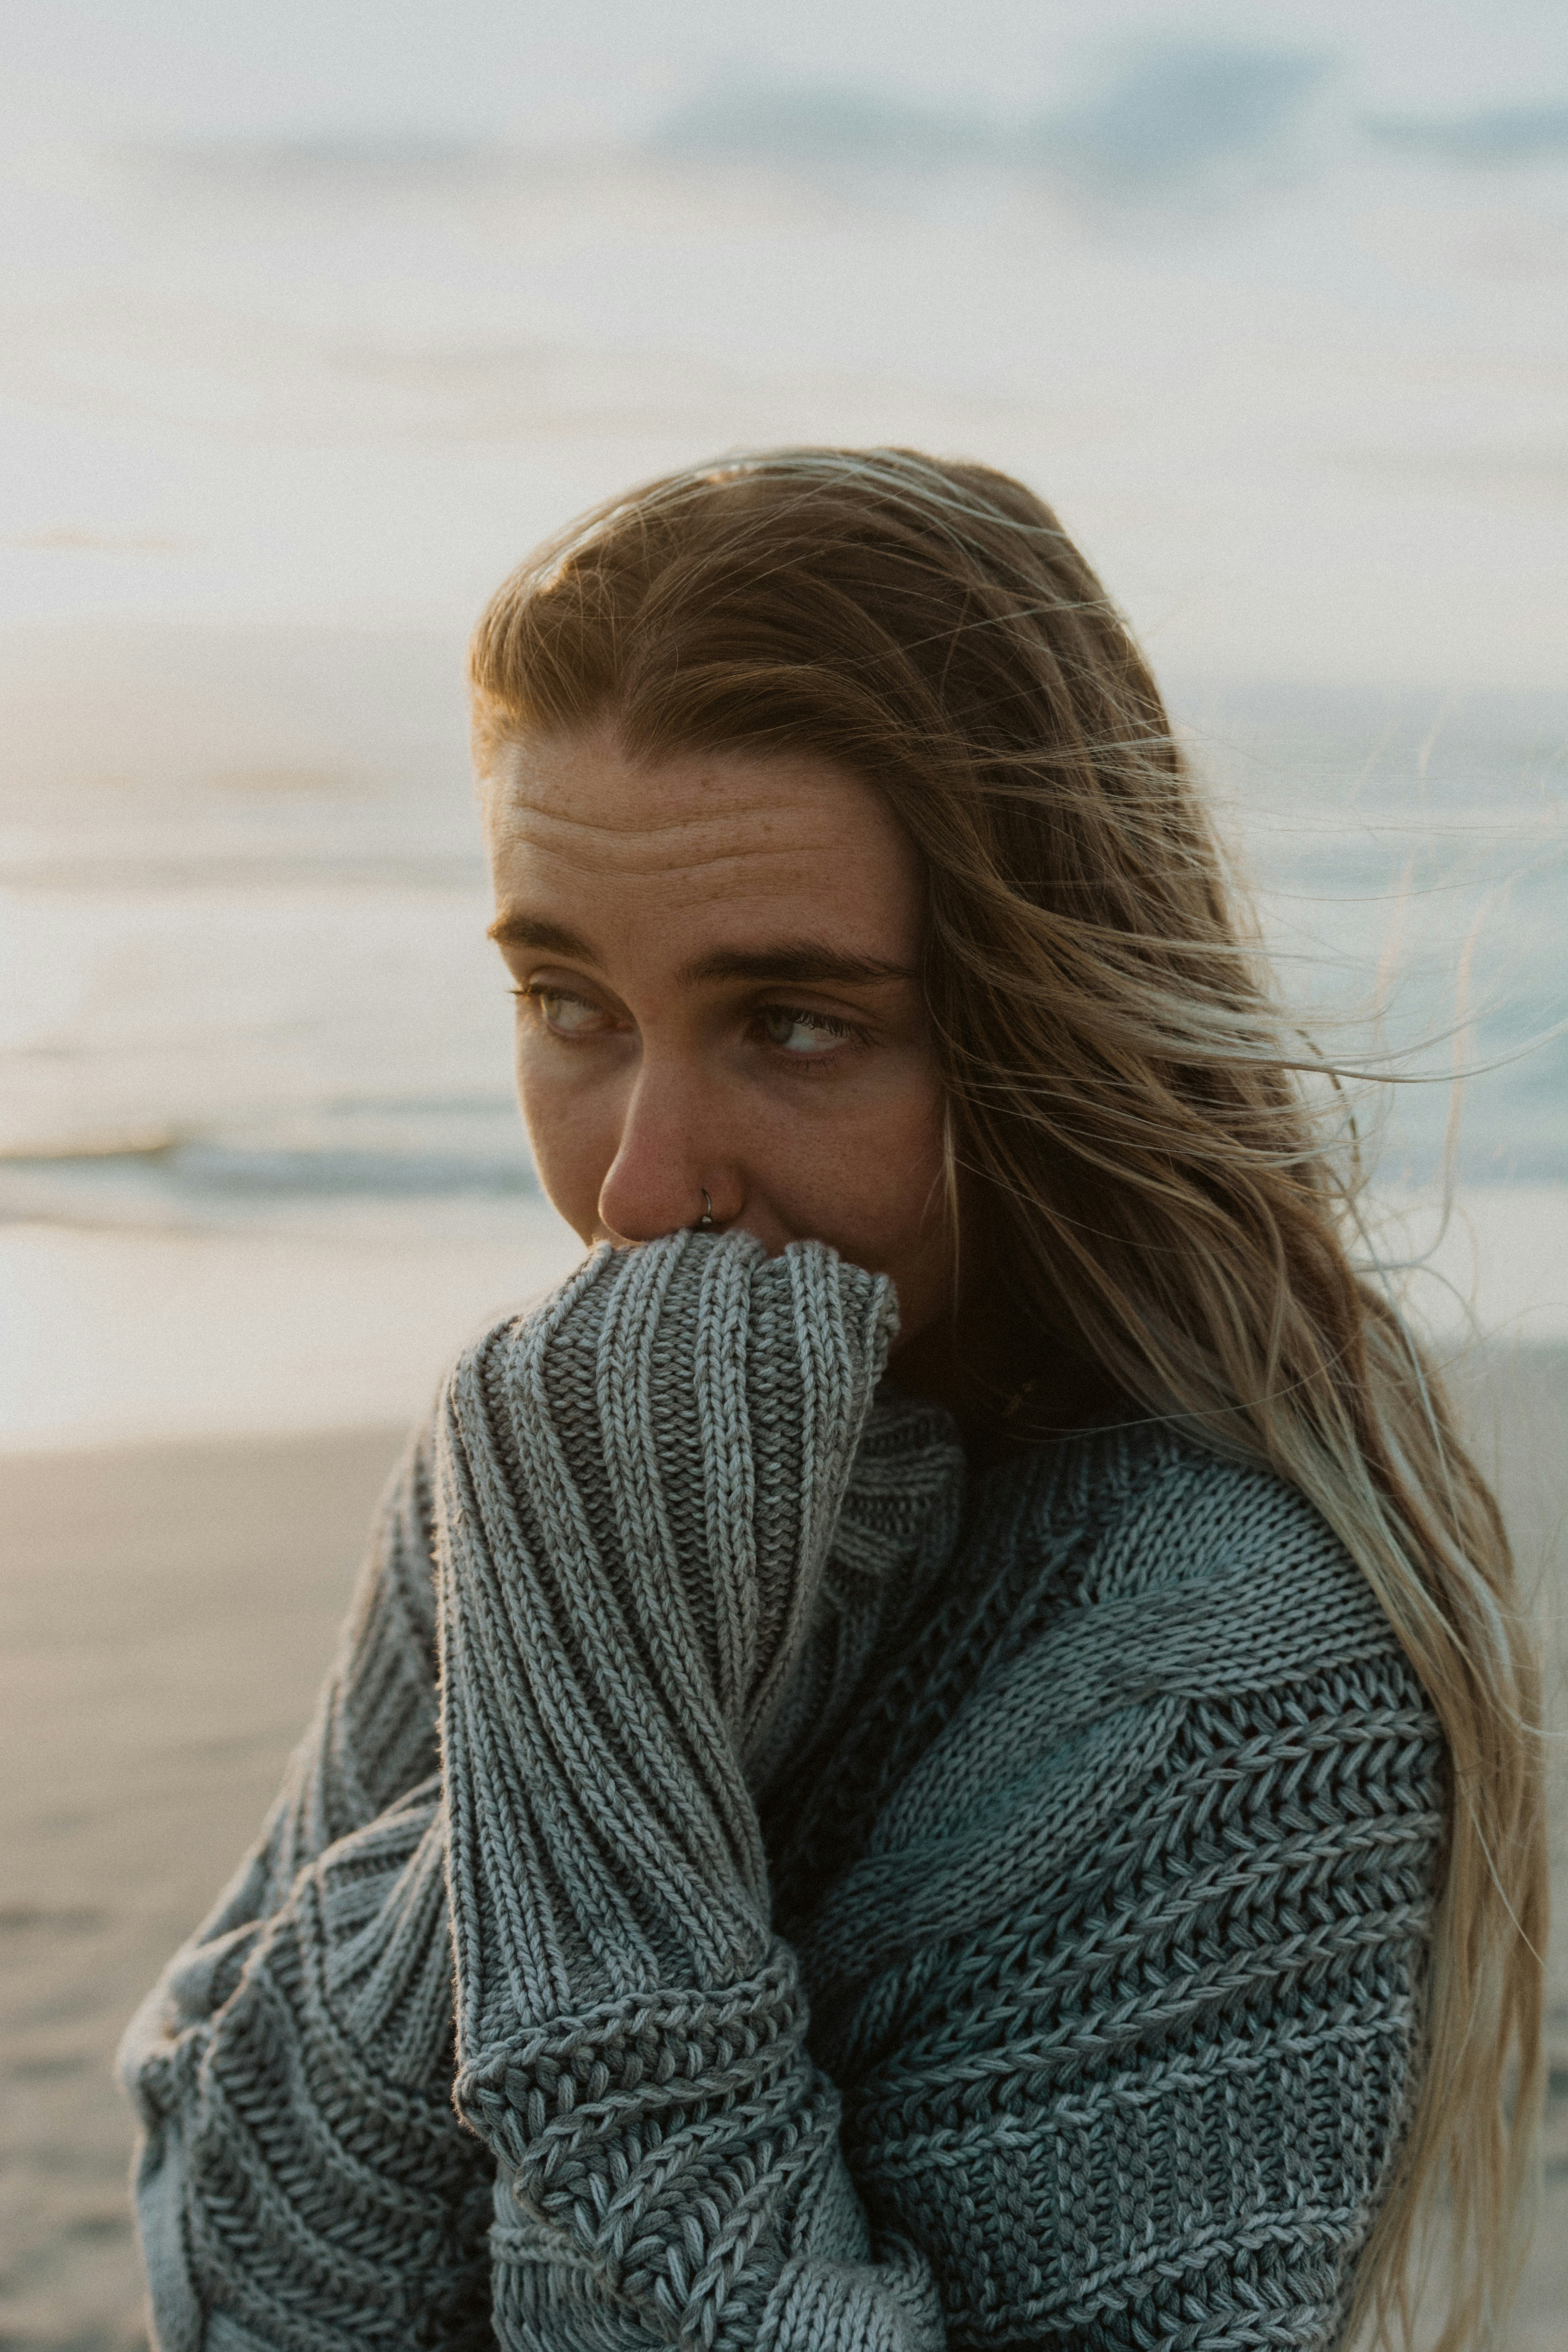 woman in gray knit sweater on beach during daytime